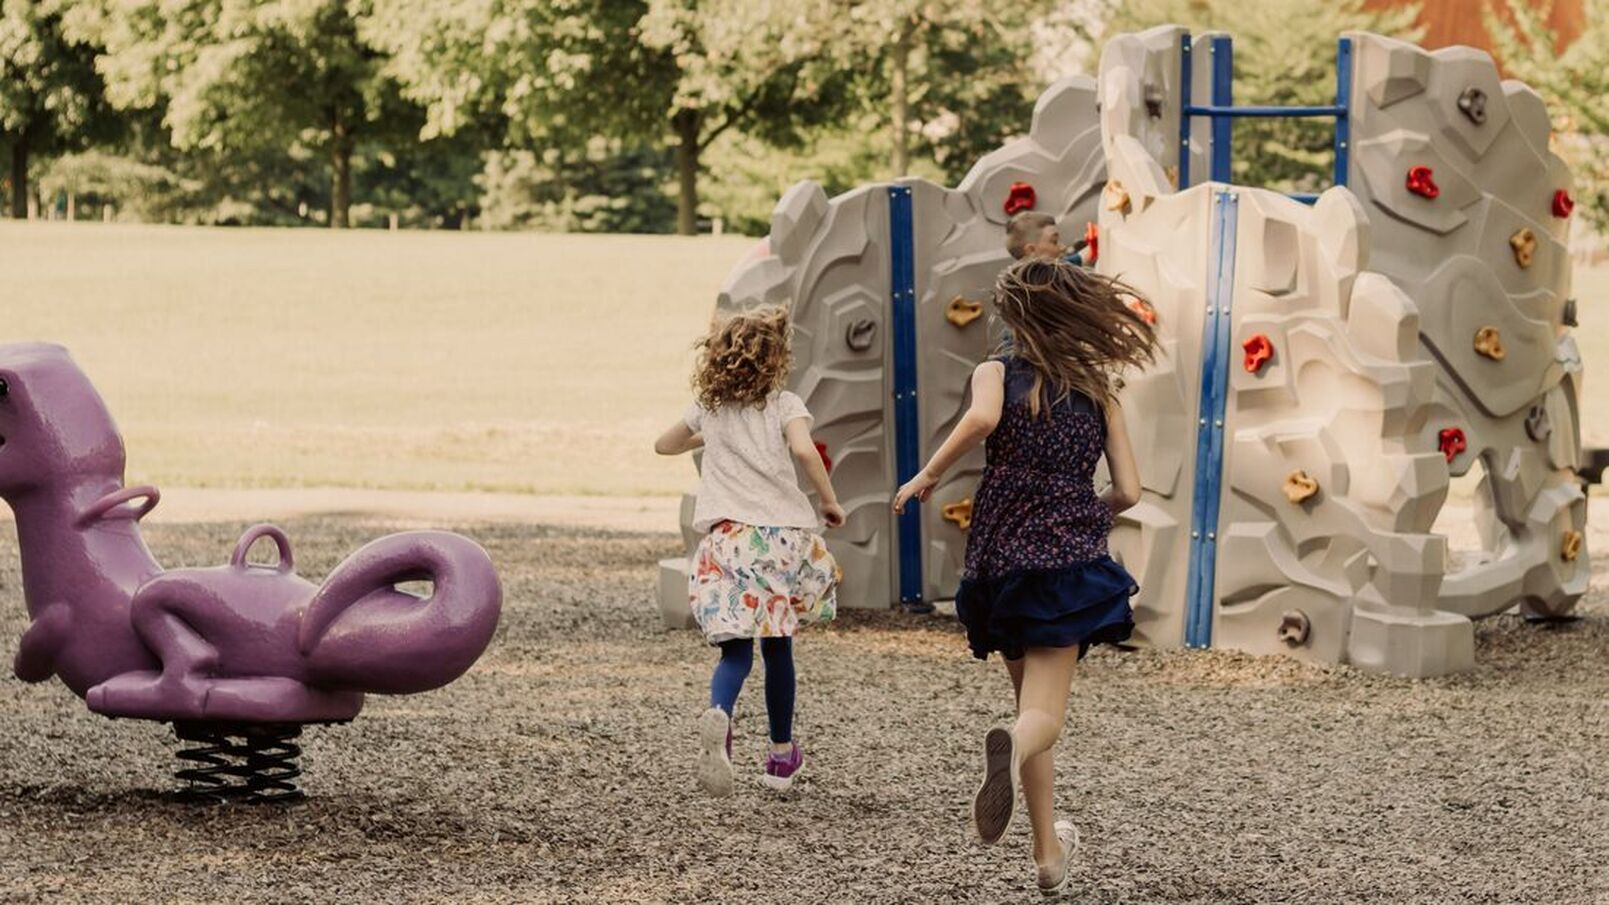 Here are two girls running in the playground of Pinafore Park. The one girl is wearing a colourful skirt, with navy blue leggings and a white top. The other girl is wearing a navy blue and red patterned dressed. they are running towards the rock climbing station of the park.